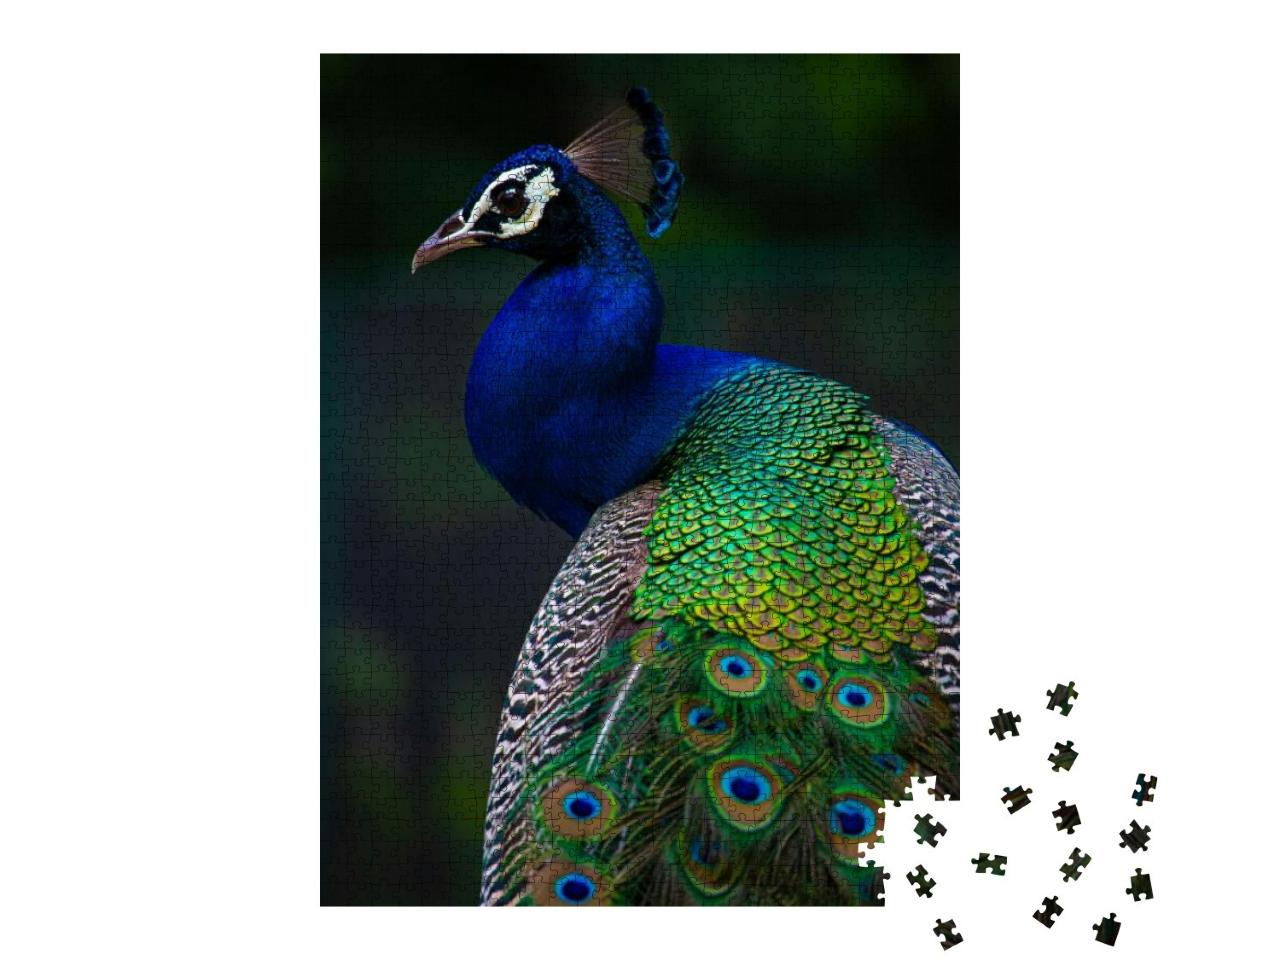 Indian Peacock, Closeup, Peacock Head, Peacock Feathers... Jigsaw Puzzle with 1000 pieces